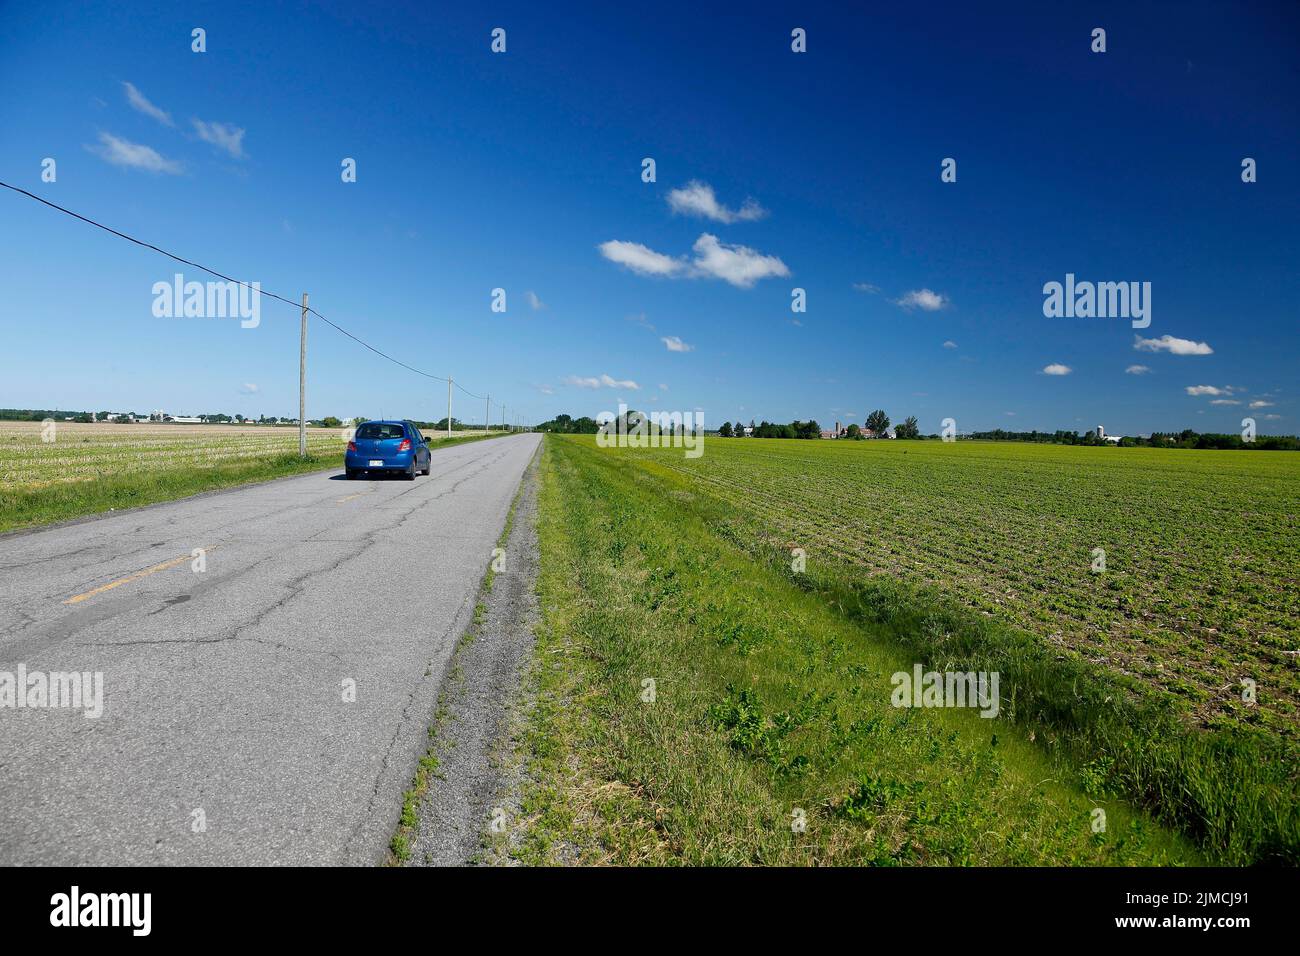 Country road, farmland landscape, Province of Quebec, Canada Stock Photo